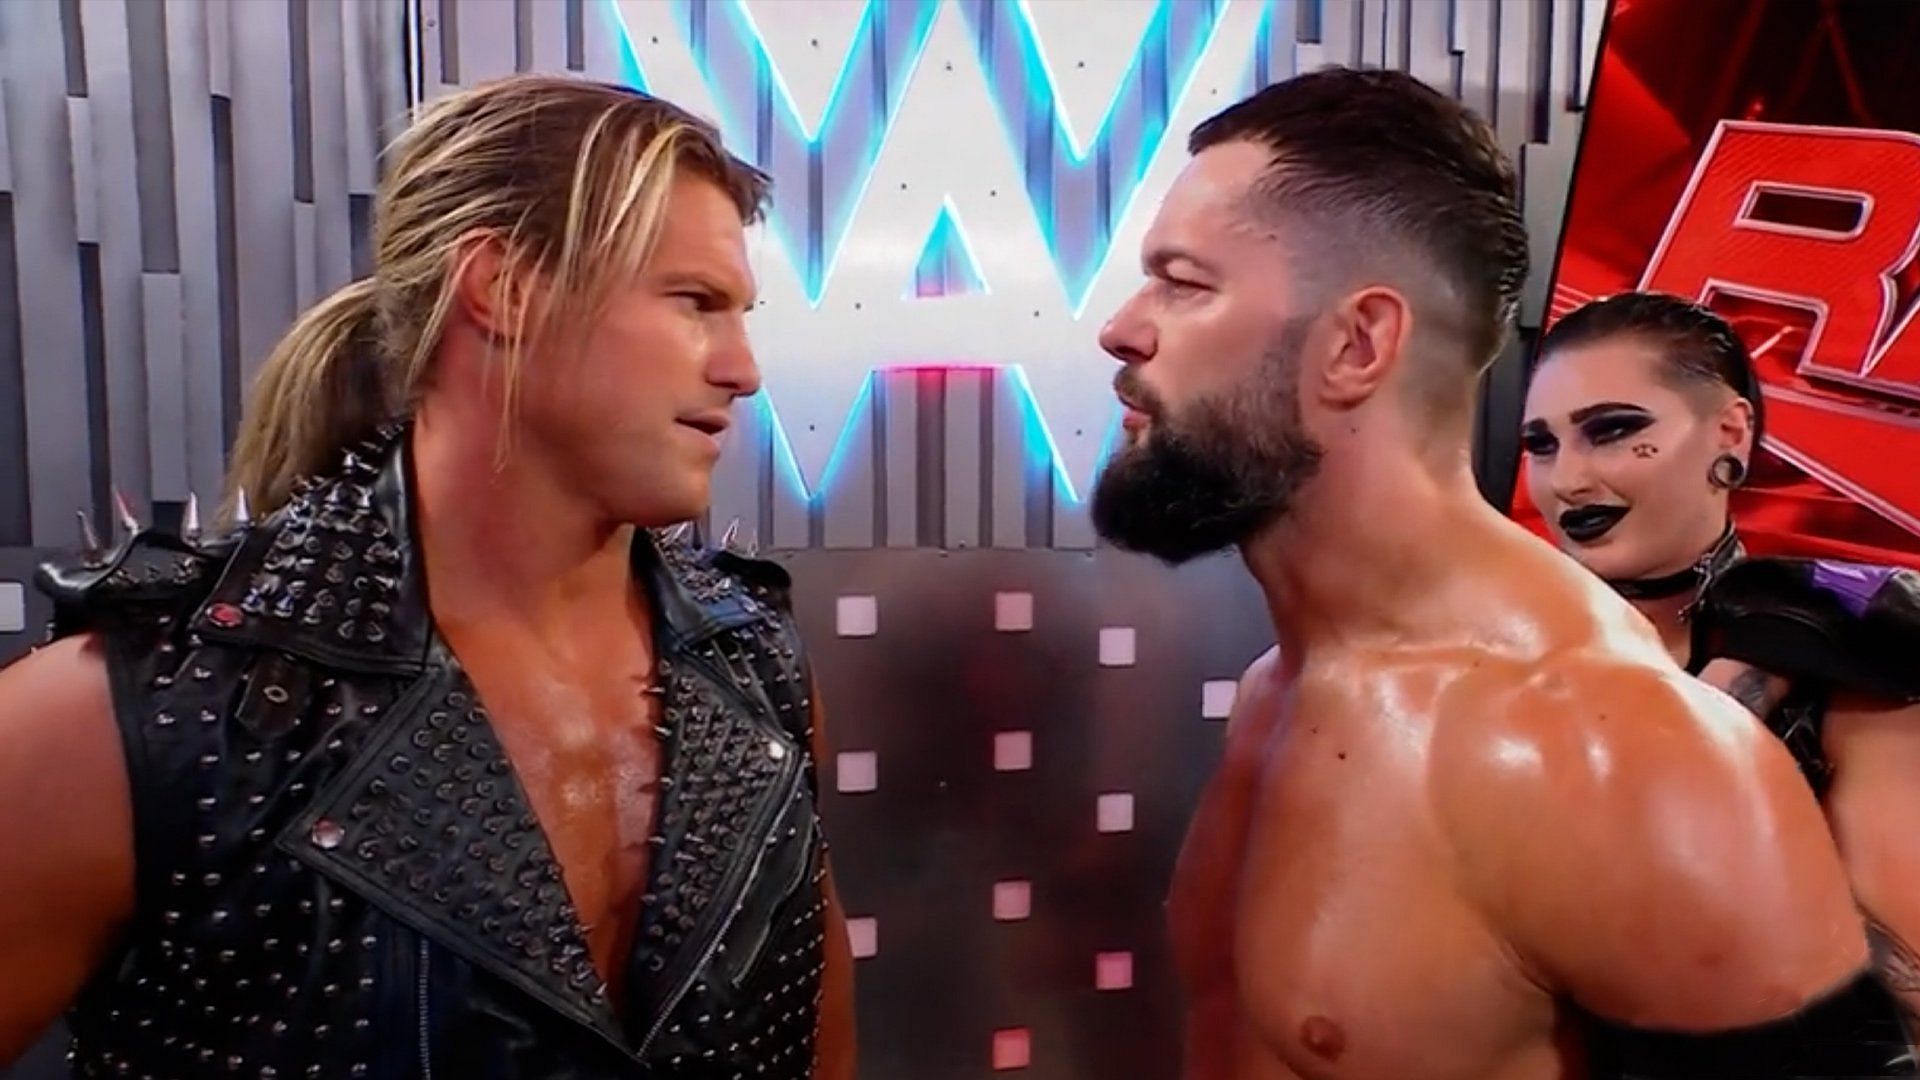 Dolph Ziggler standing up to Judgment Day